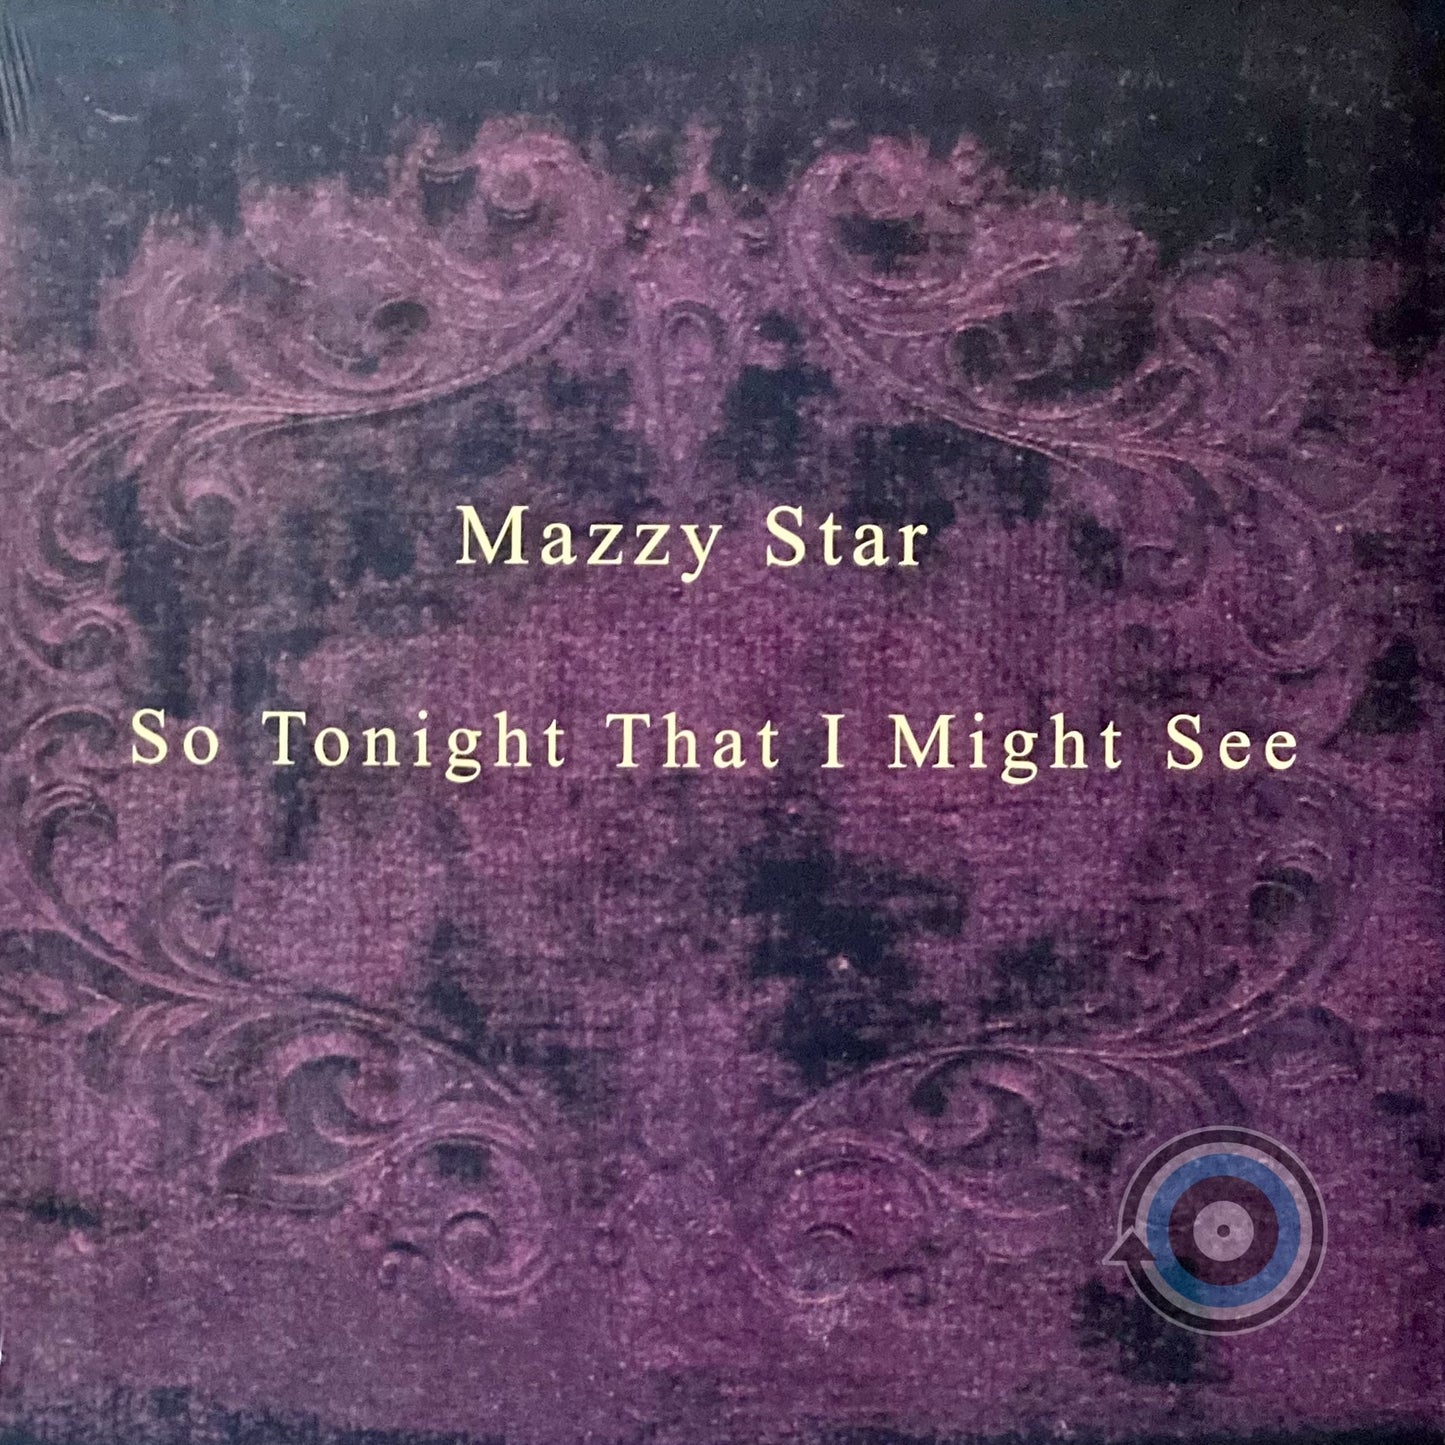 Mazzy Star - So Tonight That I Might See LP (Sealed)